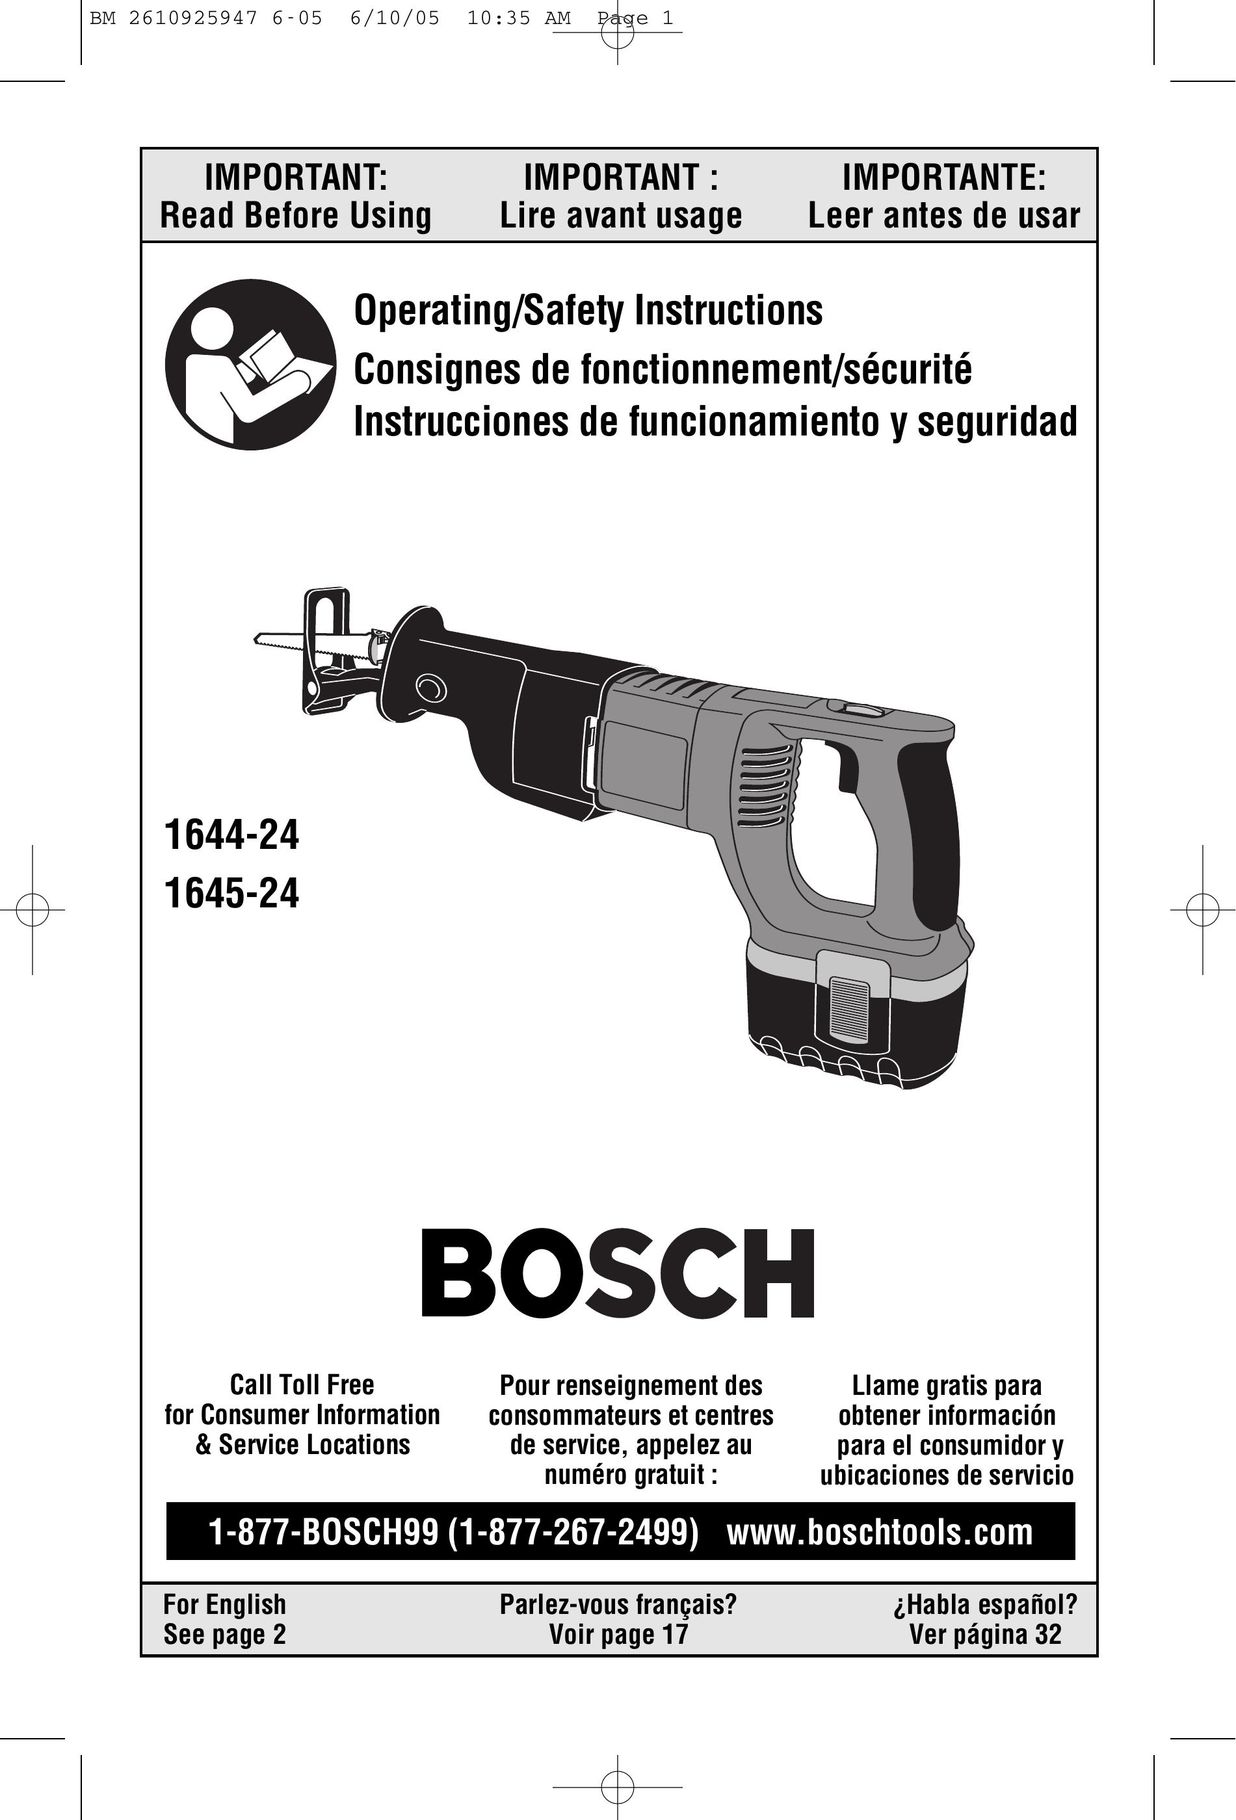 Bosch Power Tools 1644-24 Cordless Saw User Manual